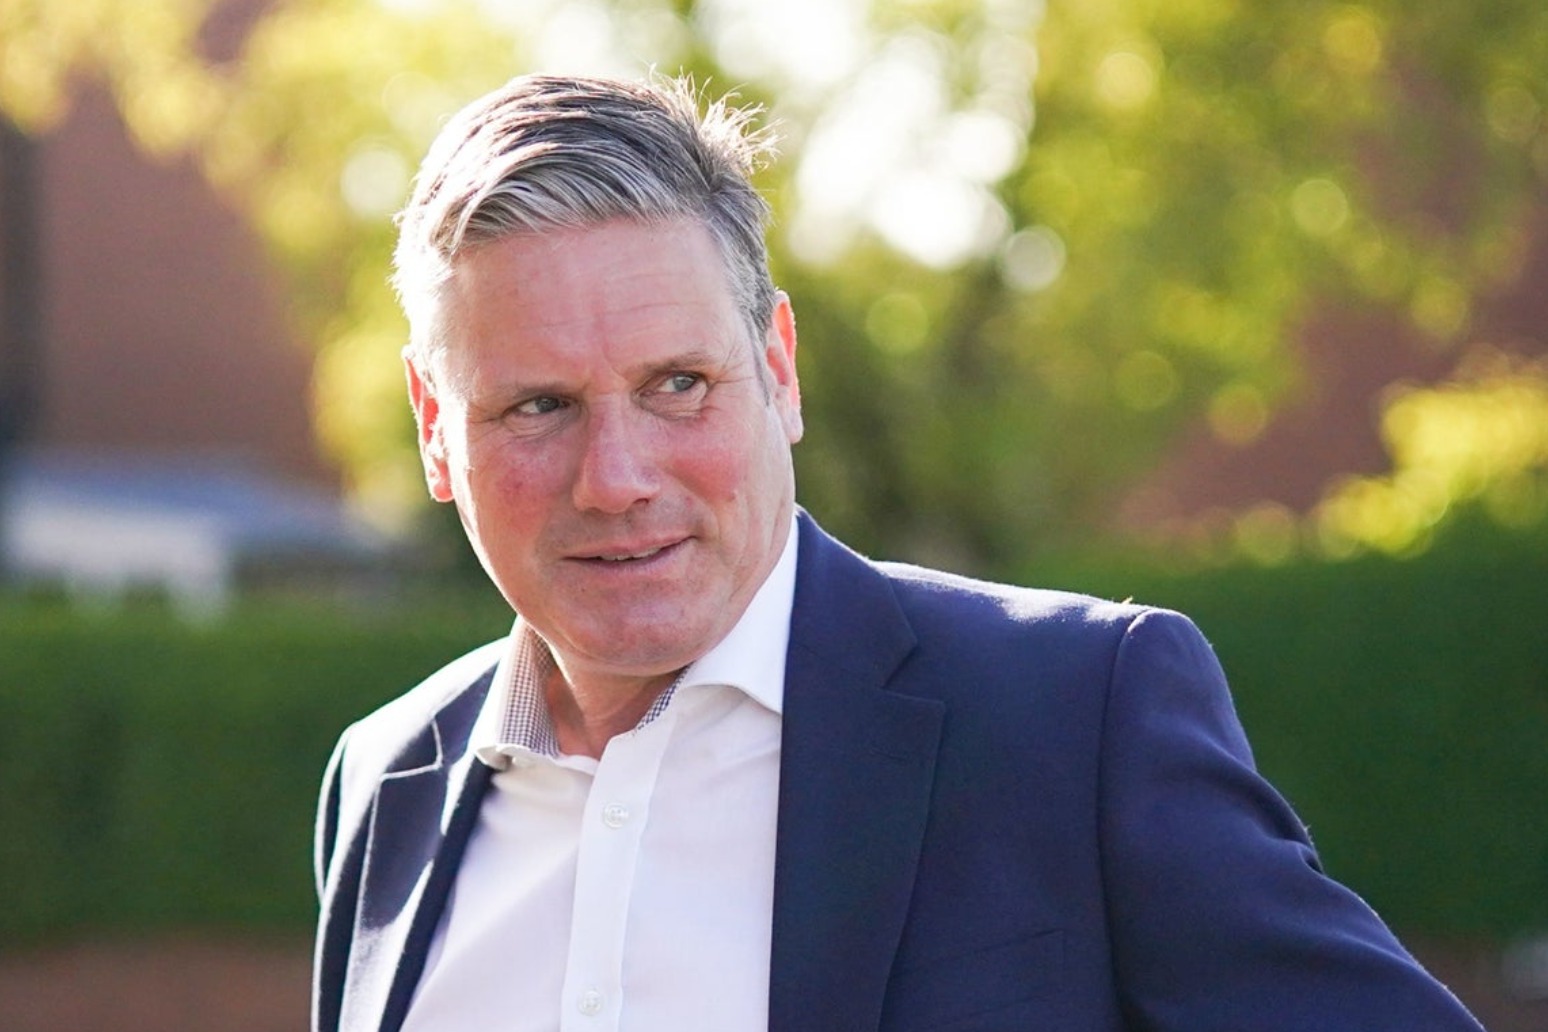 Make-or-break moment for Starmer at first in-person Labour conference since 2019 